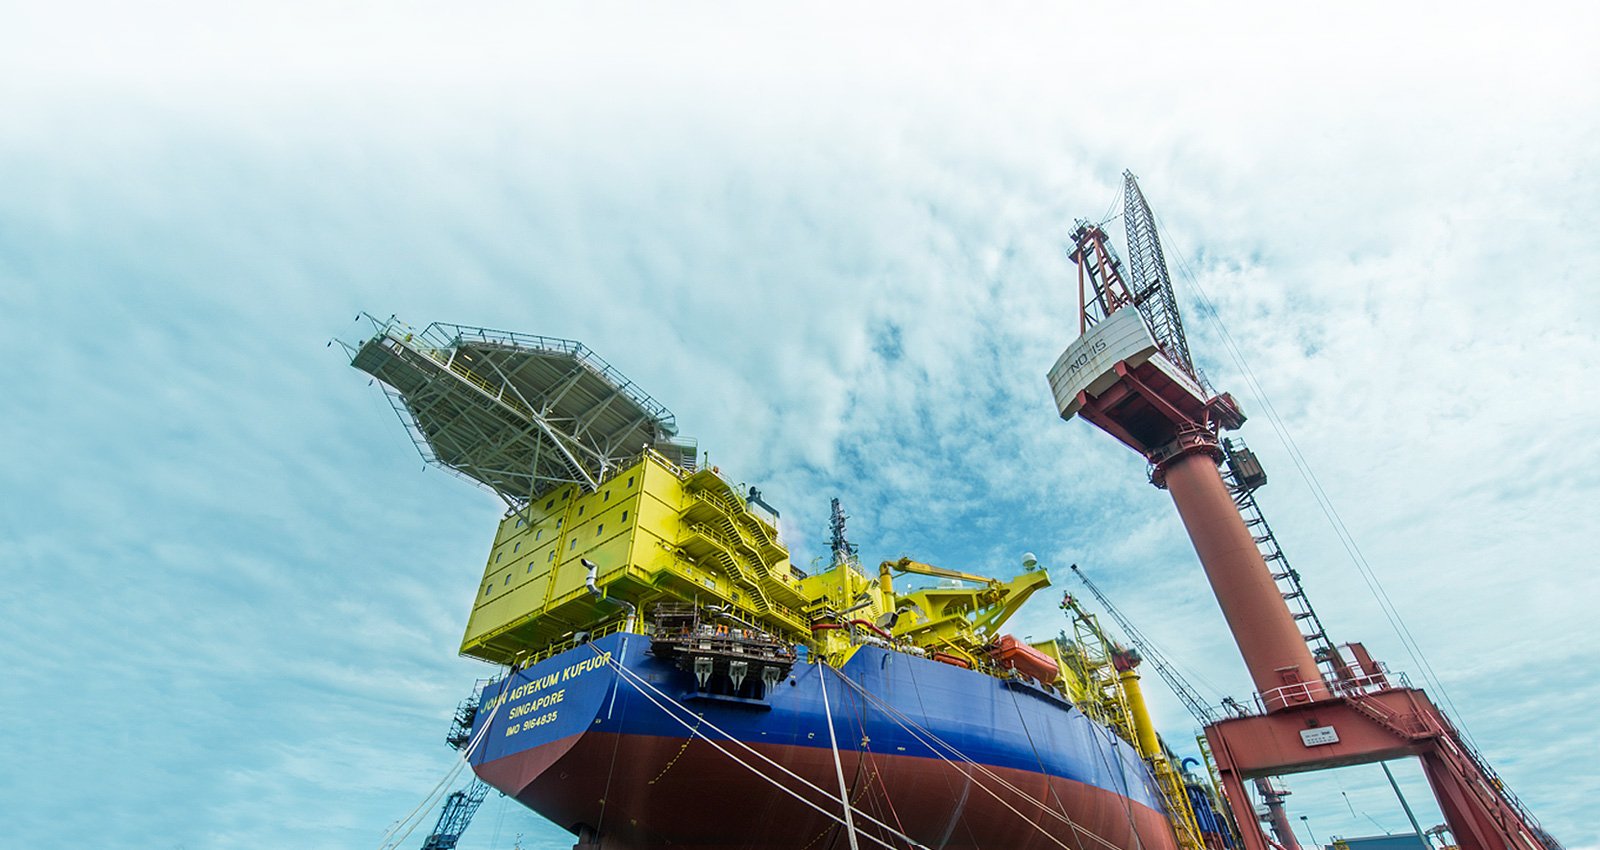 Yinson, Sumitomo, eye LNG projects with FPSO, FSU deal